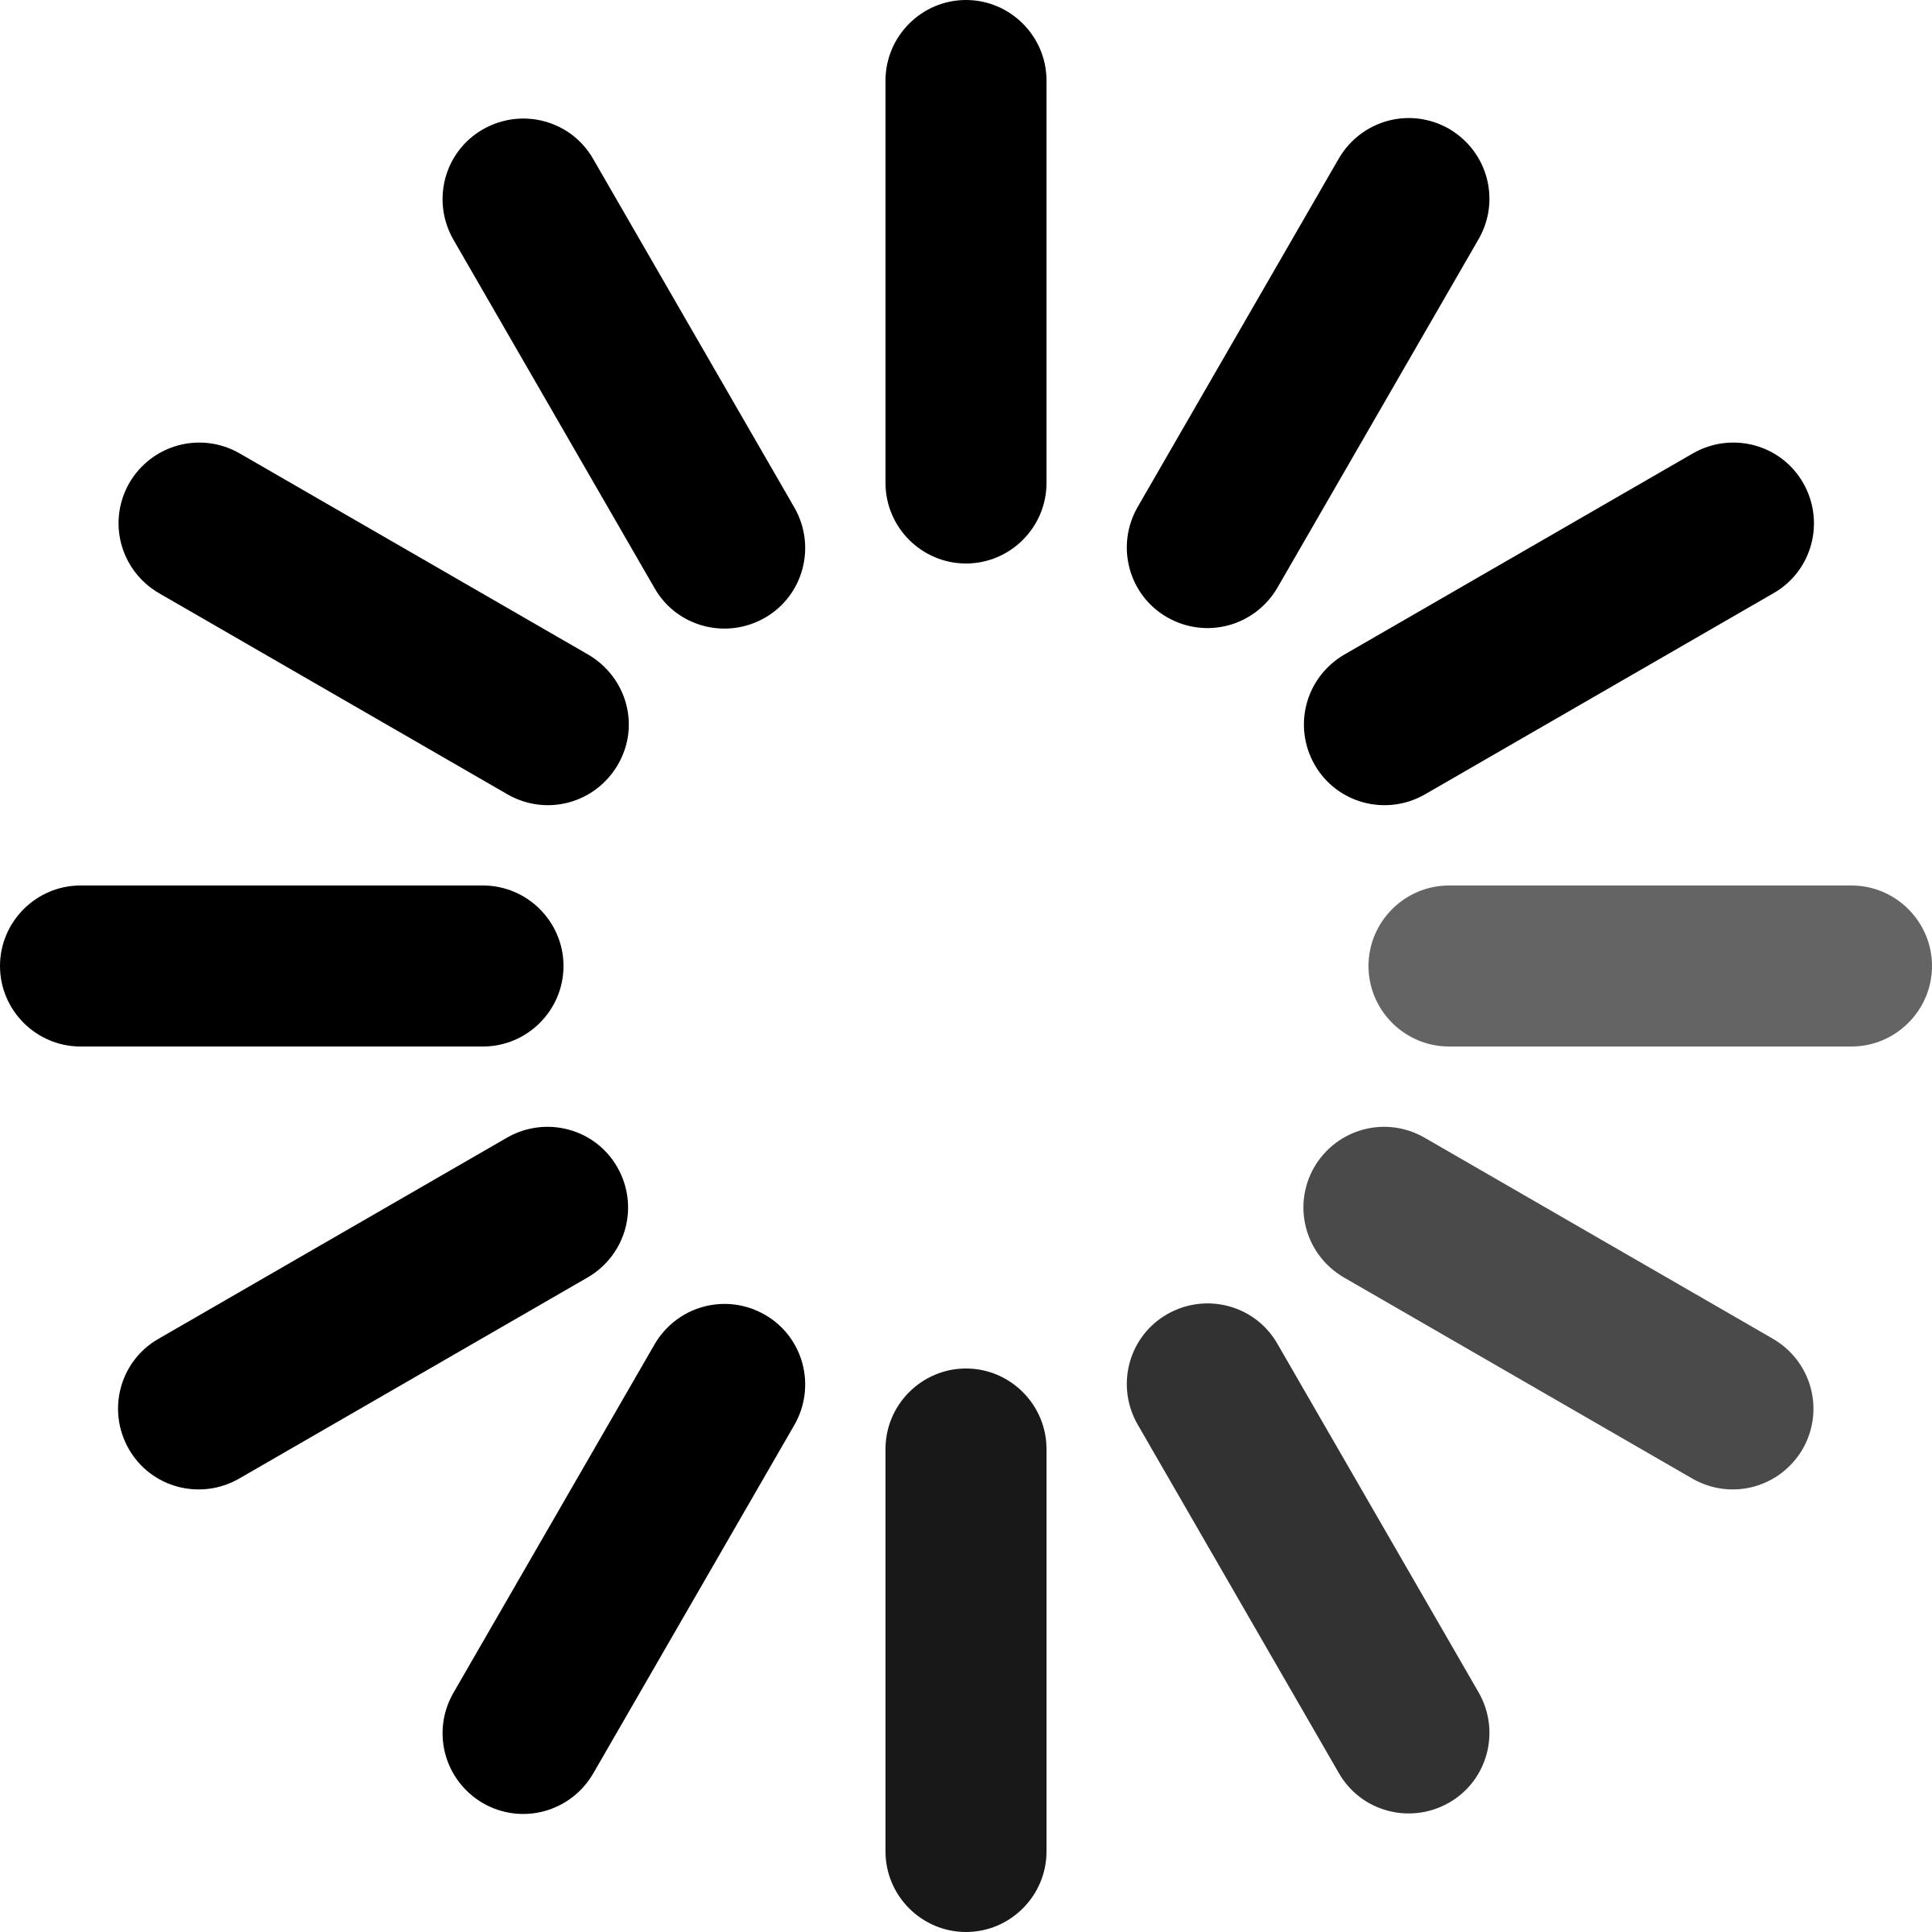 Circular loading icon with dashes (and some fading out) png